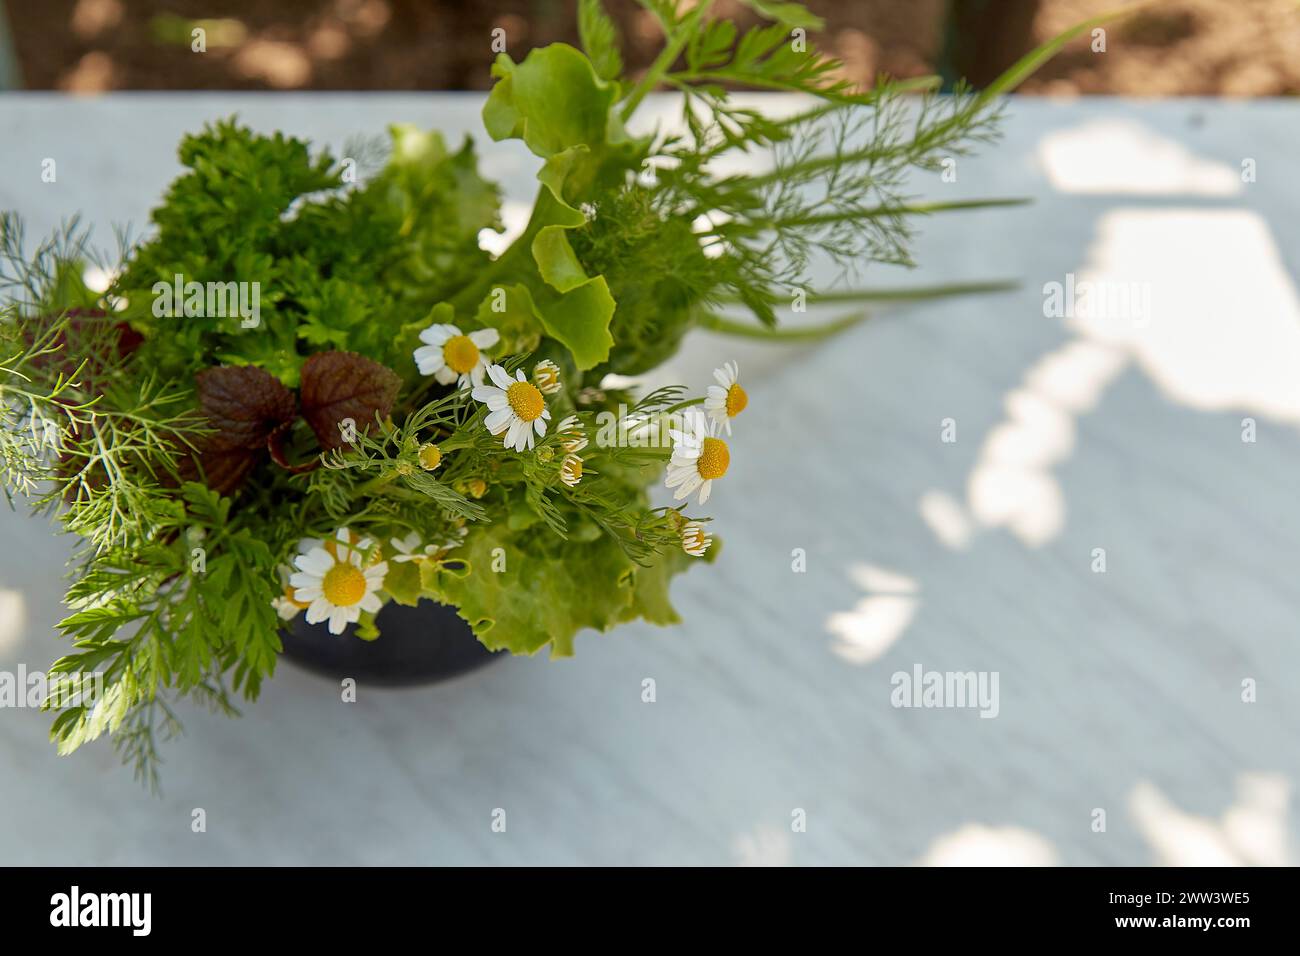 Top view of organic seasonal greens - parsley, dill, basil, lettuce and camomile outside. Copy space Stock Photo